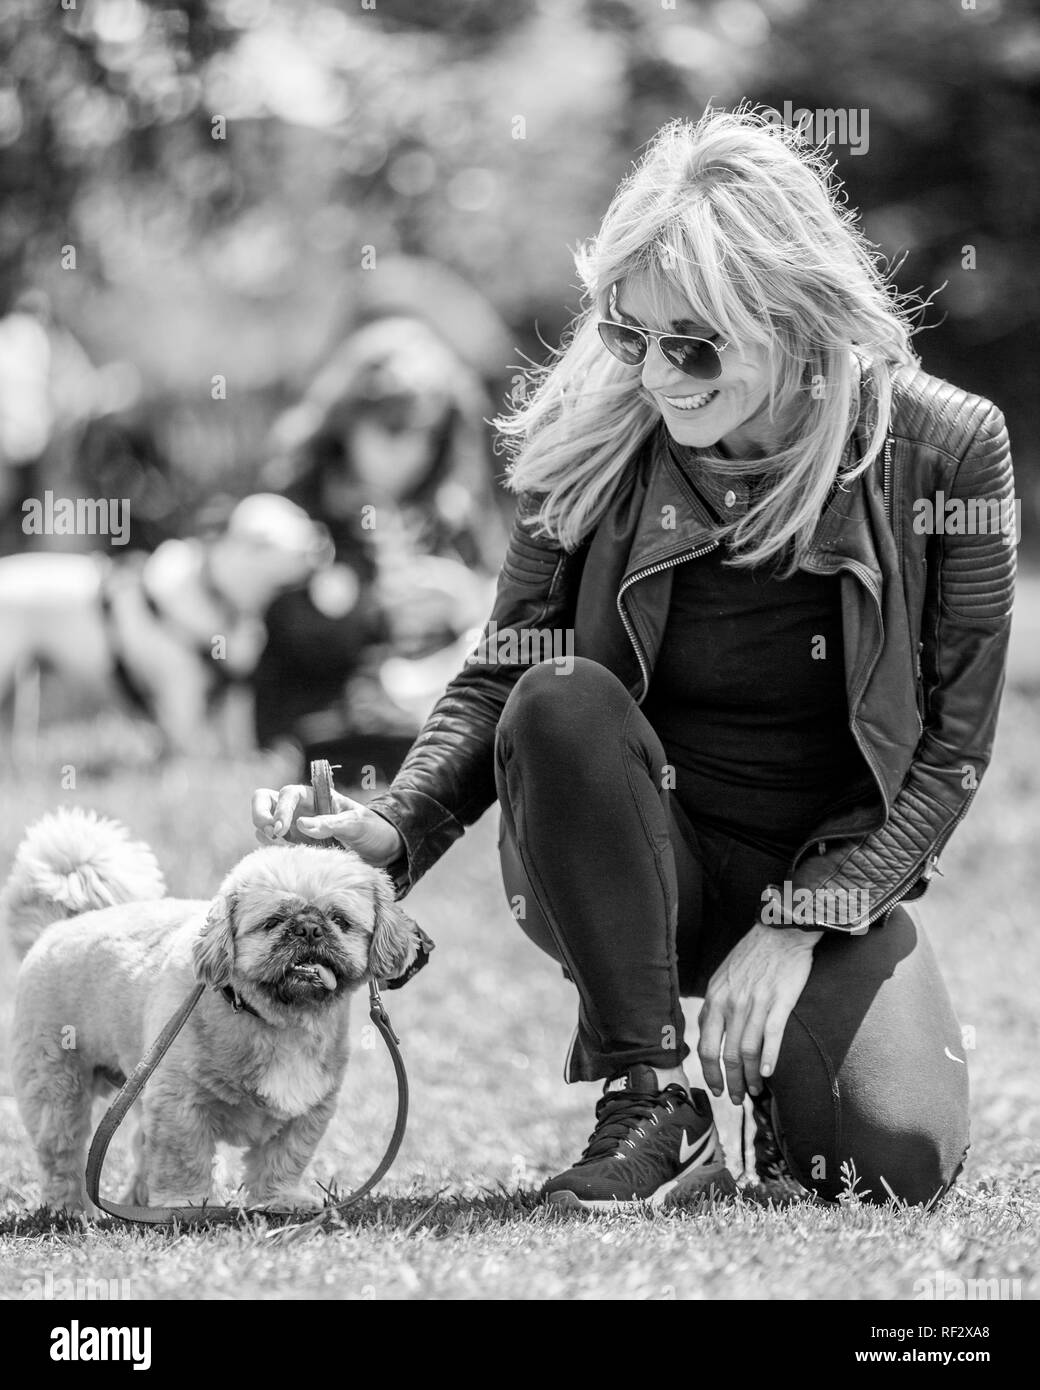 Michelle Collins ready to judge a dog show on Hampstead heath in London with her dog Humphrey Stock Photo